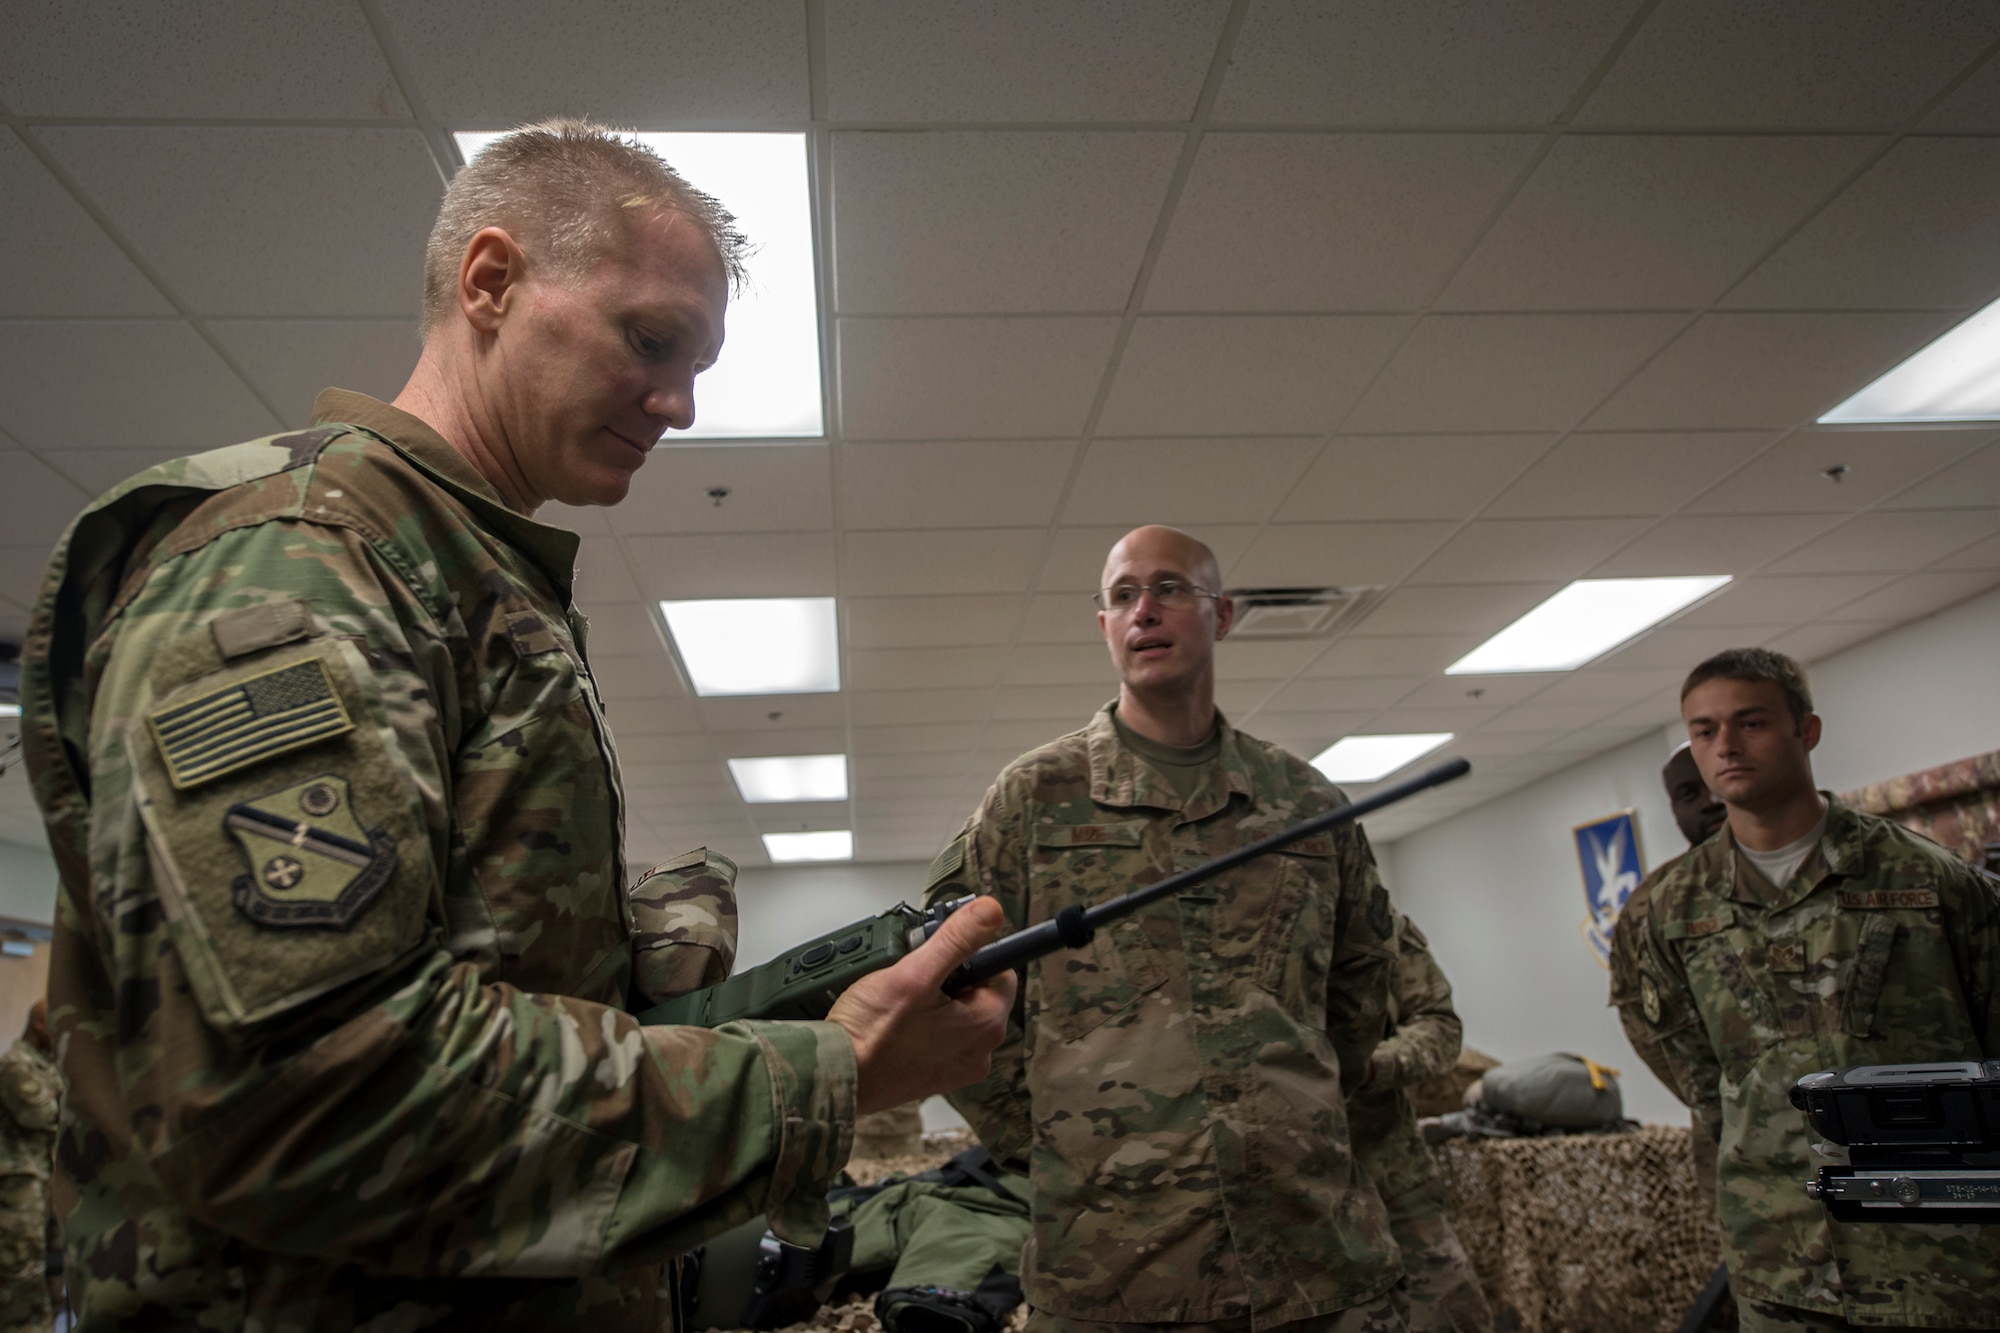 Col. Paul Birch, 93d Air Ground Operations Wing (AGOW) commander, inspects a radio communication device during an immersion tour, June 25, 2018, at Moody Air Force Base, Ga. Birch toured the 820th Base Defense Group to gain a better understanding of their overall mission, duties and comprehensive capabilities. Prior to taking command of the 93d AGOW, Birch was the commander of the 380th Expeditionary Operations Group at Al Dhafra Air Base, United Arab Emirates. (U.S. Air Force photo by Airman 1st Class Eugene Oliver)